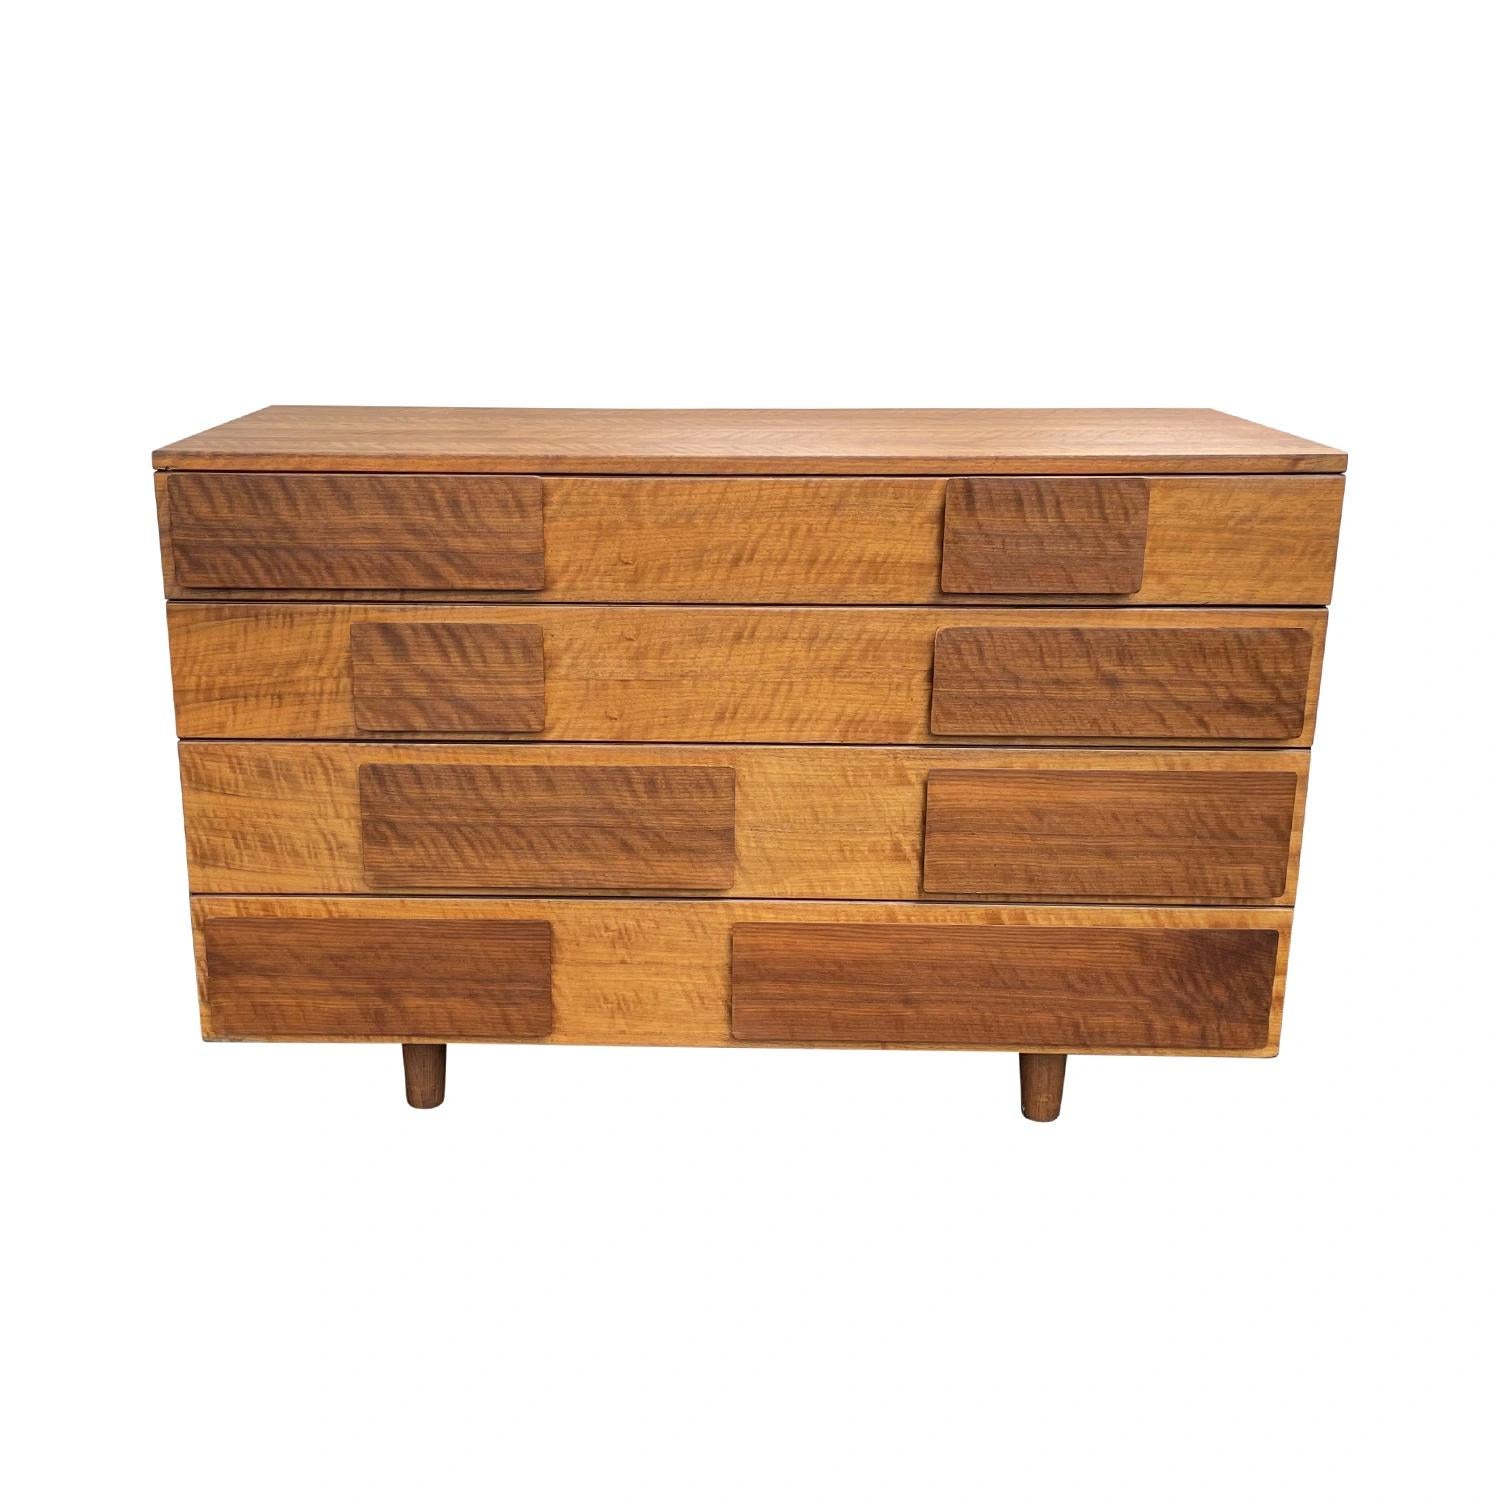 A light-brown, vintage Mid-Cenutry Modern Italian, American geometric dresser cupboard made of hand crafted polished walnut, designed by Gio Ponti and produced by M. Singer & Sons dresser in New York City, United States. The sculptural chest,